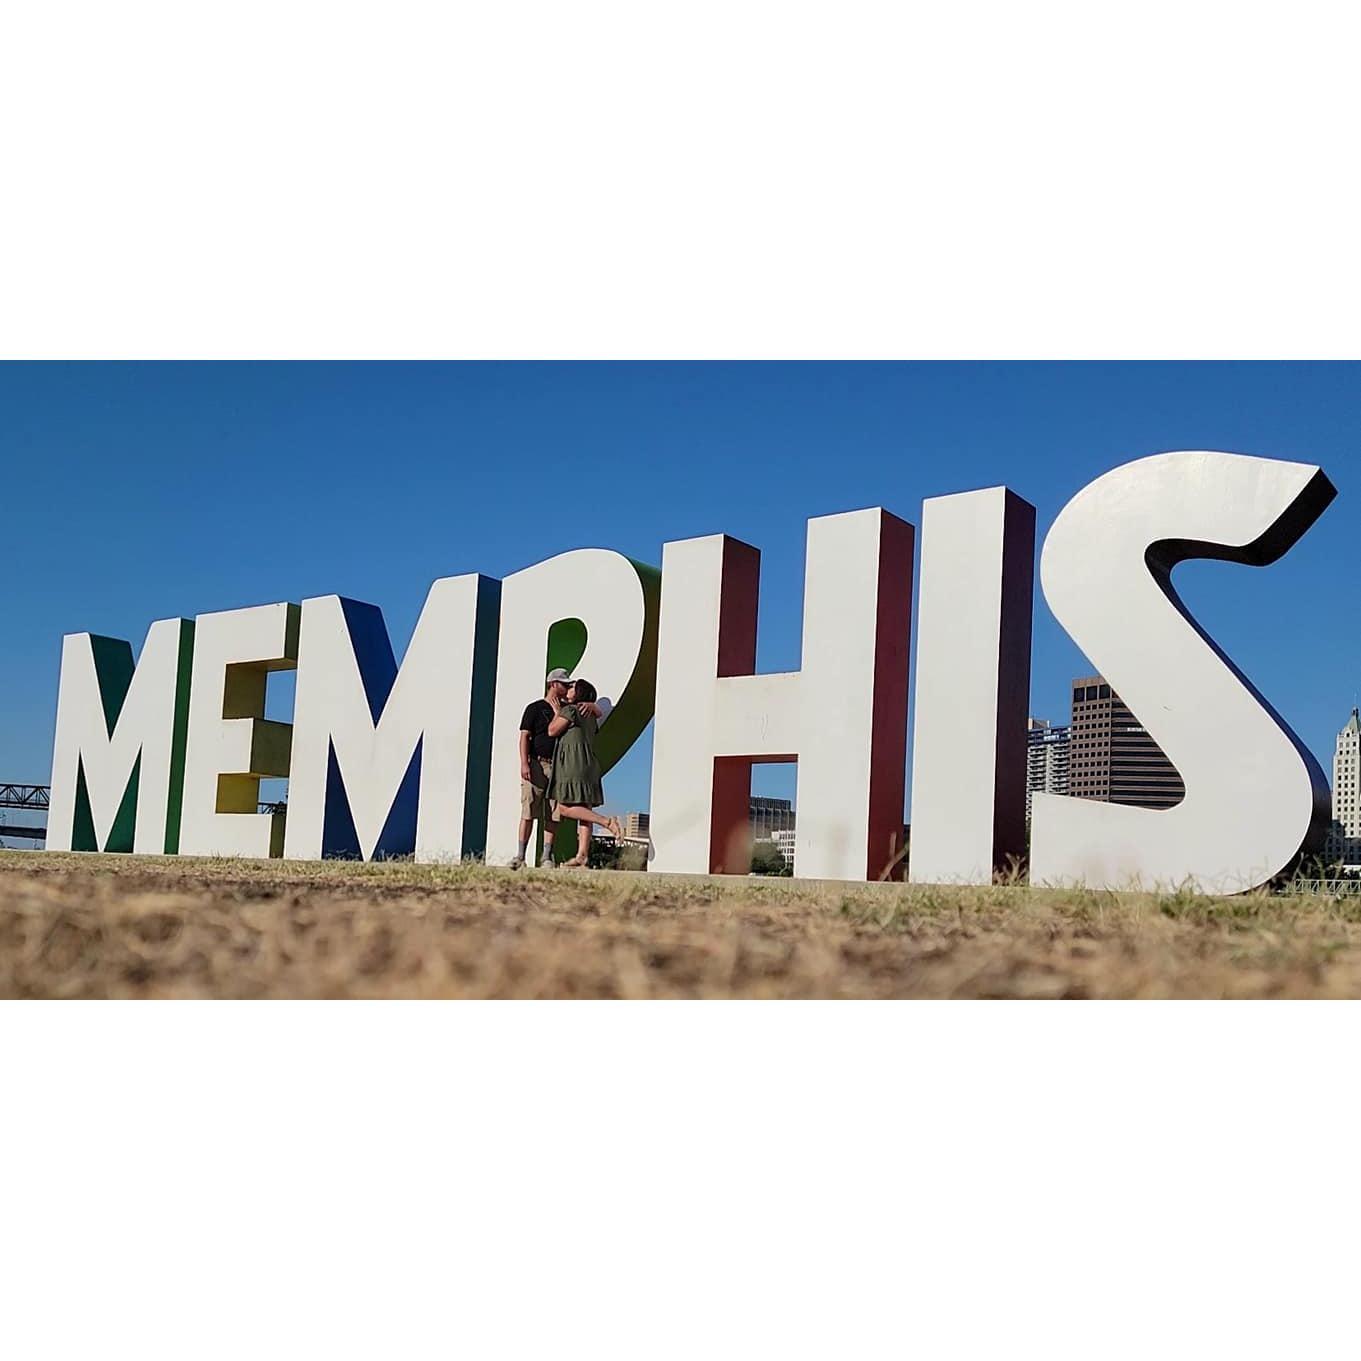 We went to Memphis last summer and got to explore the city. Beale Street was unforgettable.